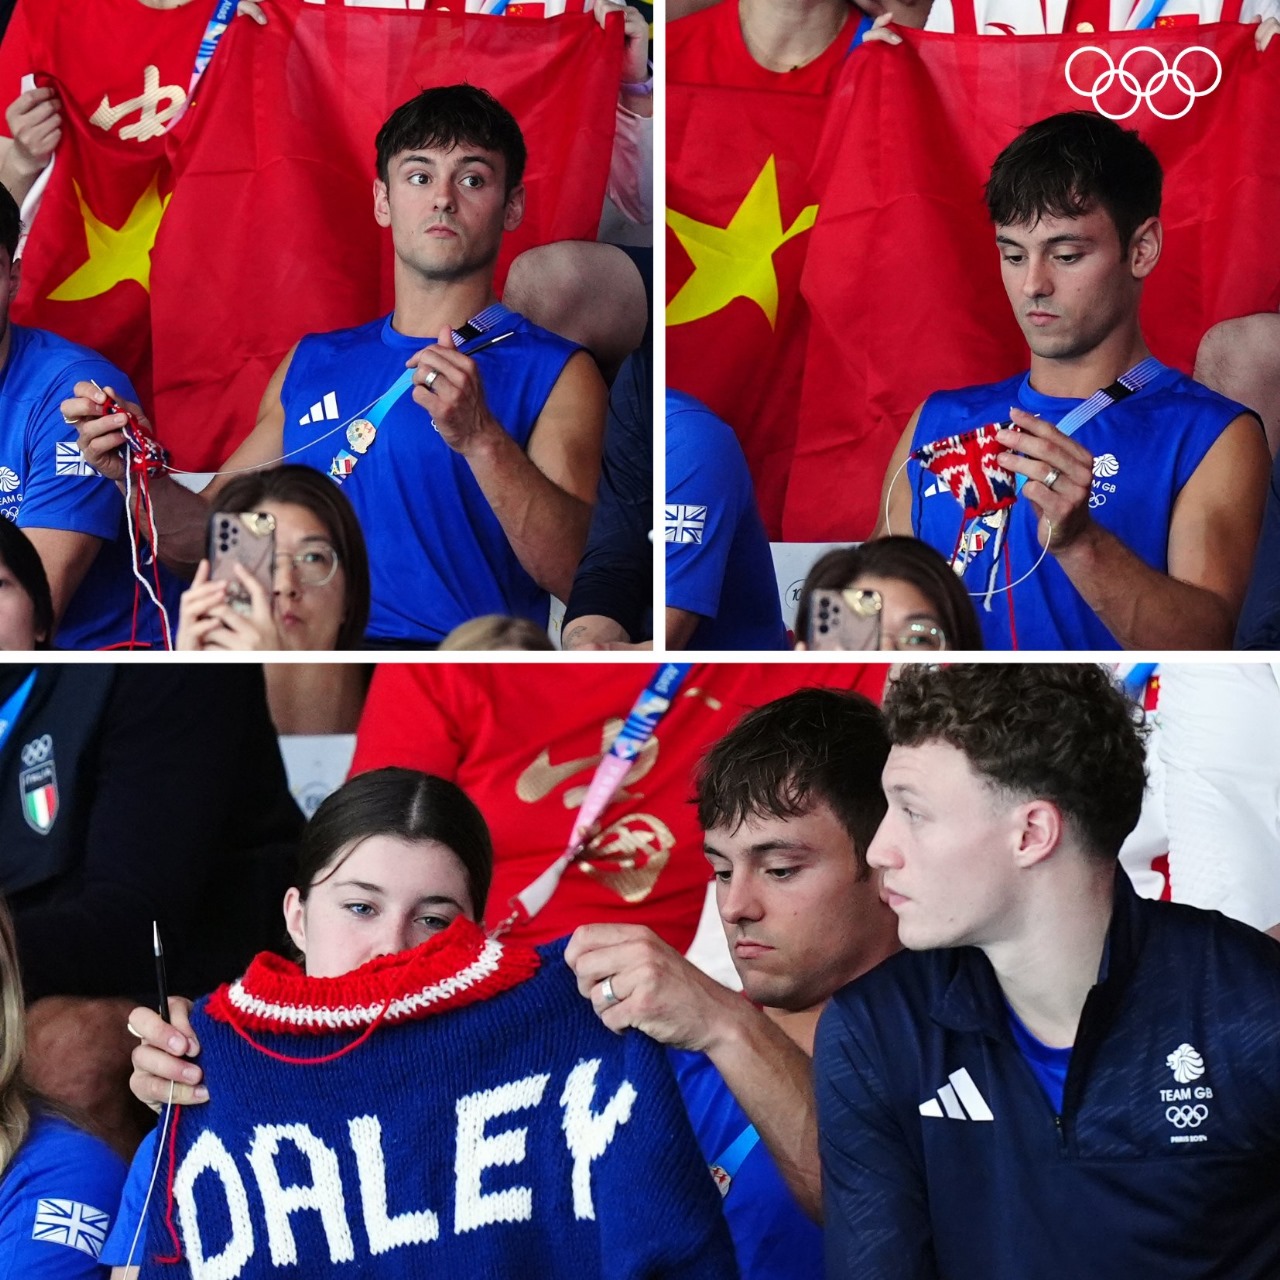 Tom Daley knits in the stands at the Paris Games on Saturday, July 27